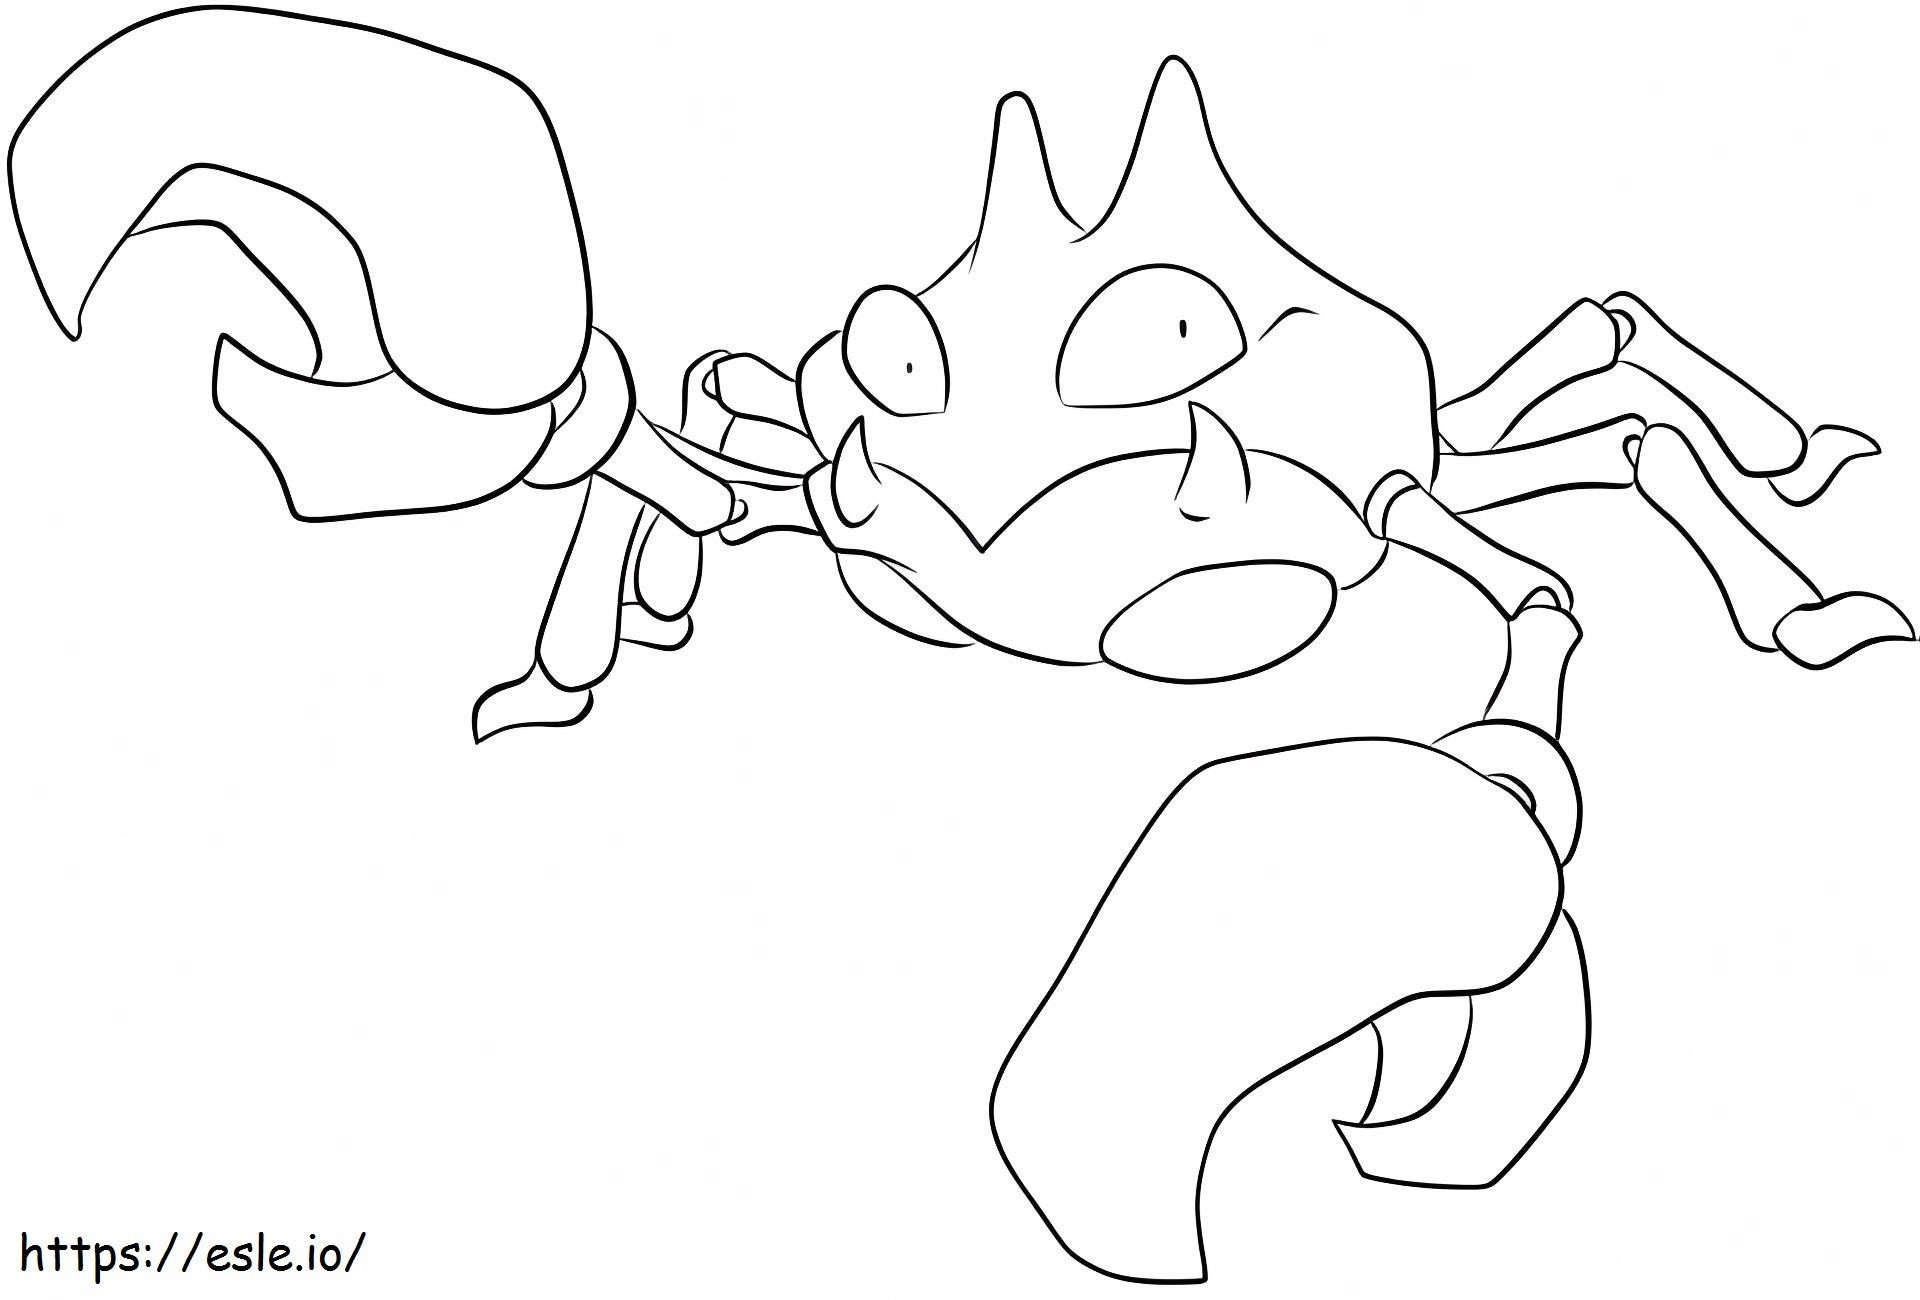 Krabby 3 coloring page